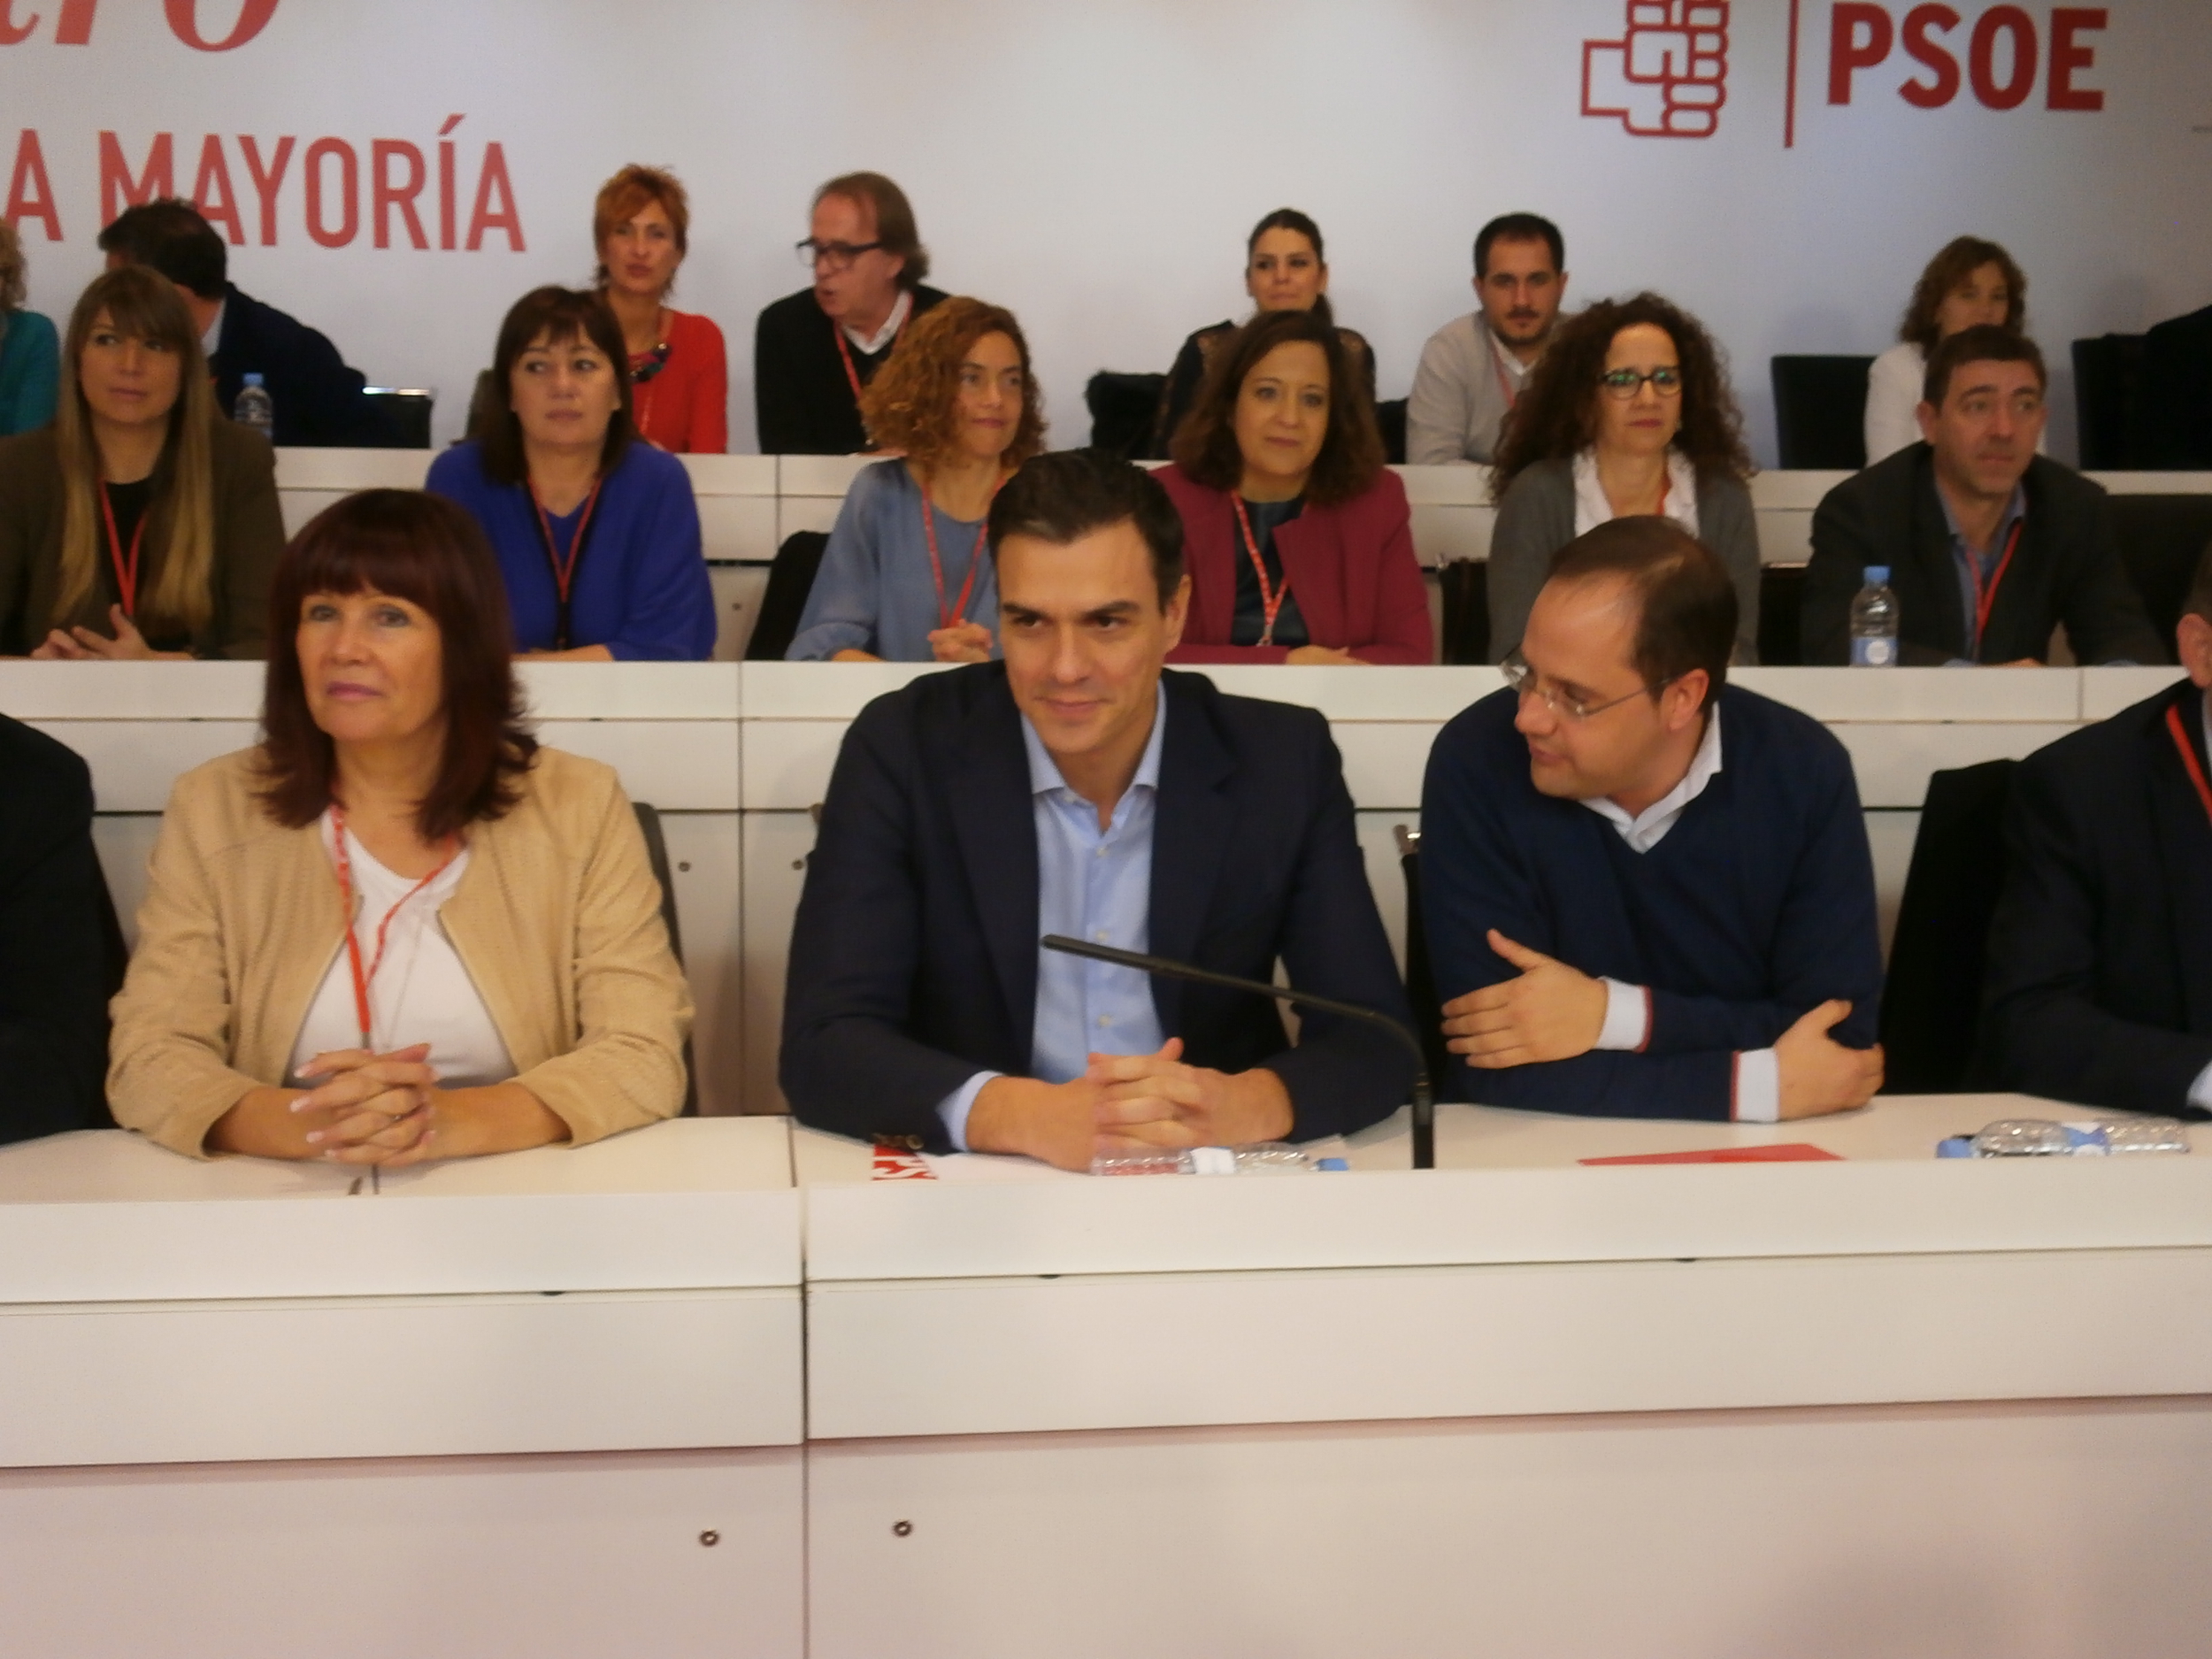 Image of PSOE's Federal Committee with Pedro Sánchez at the forefront (by ACN)